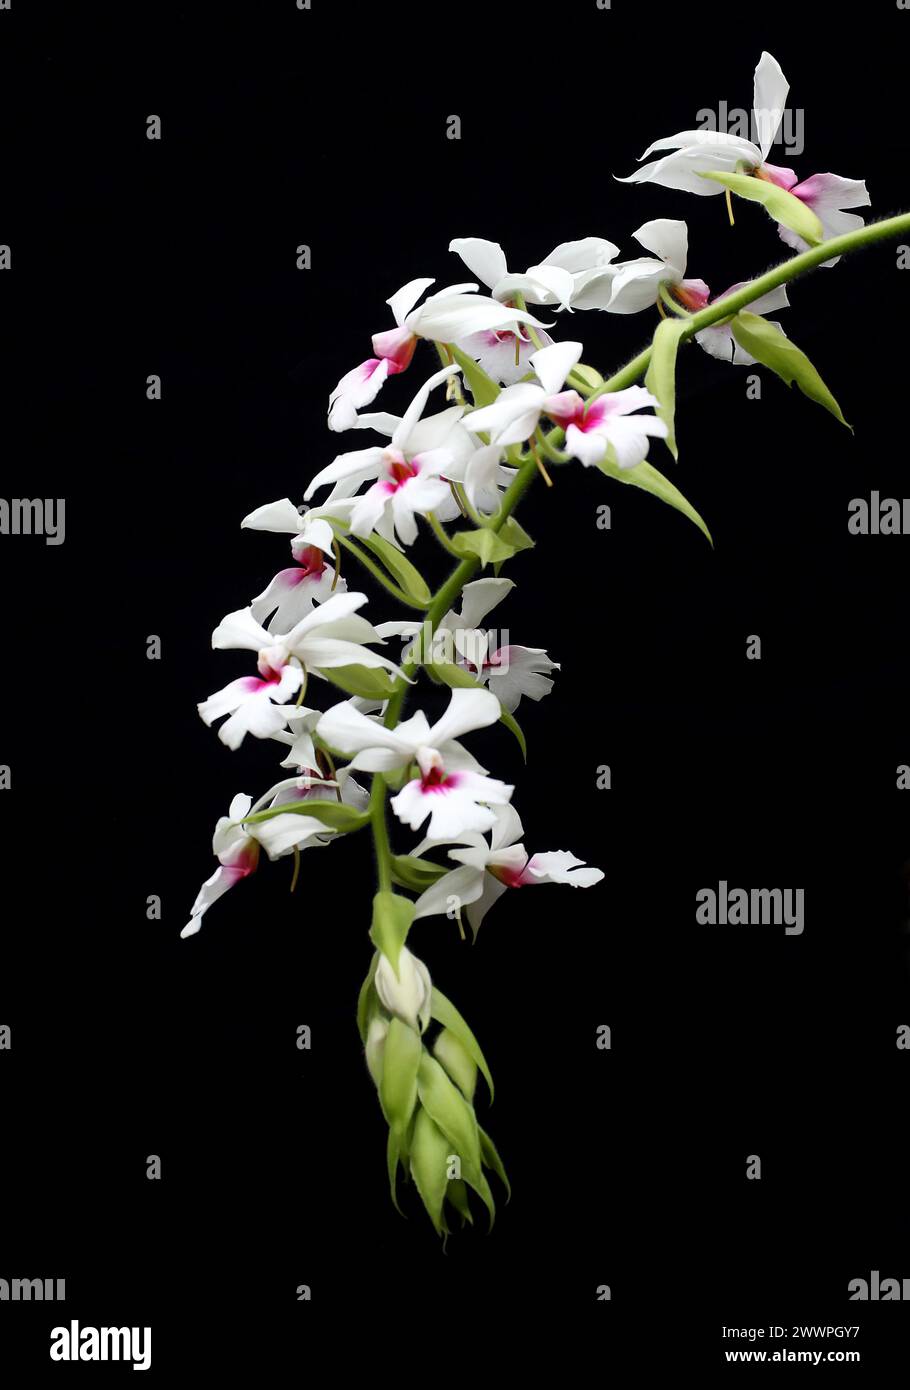 Orchid, Calanthe vestita, Epidendroideae, Orchidaceae. Calanthe vestita is a species of orchid. It is widespread throughout much of Southeast Asia. Stock Photo